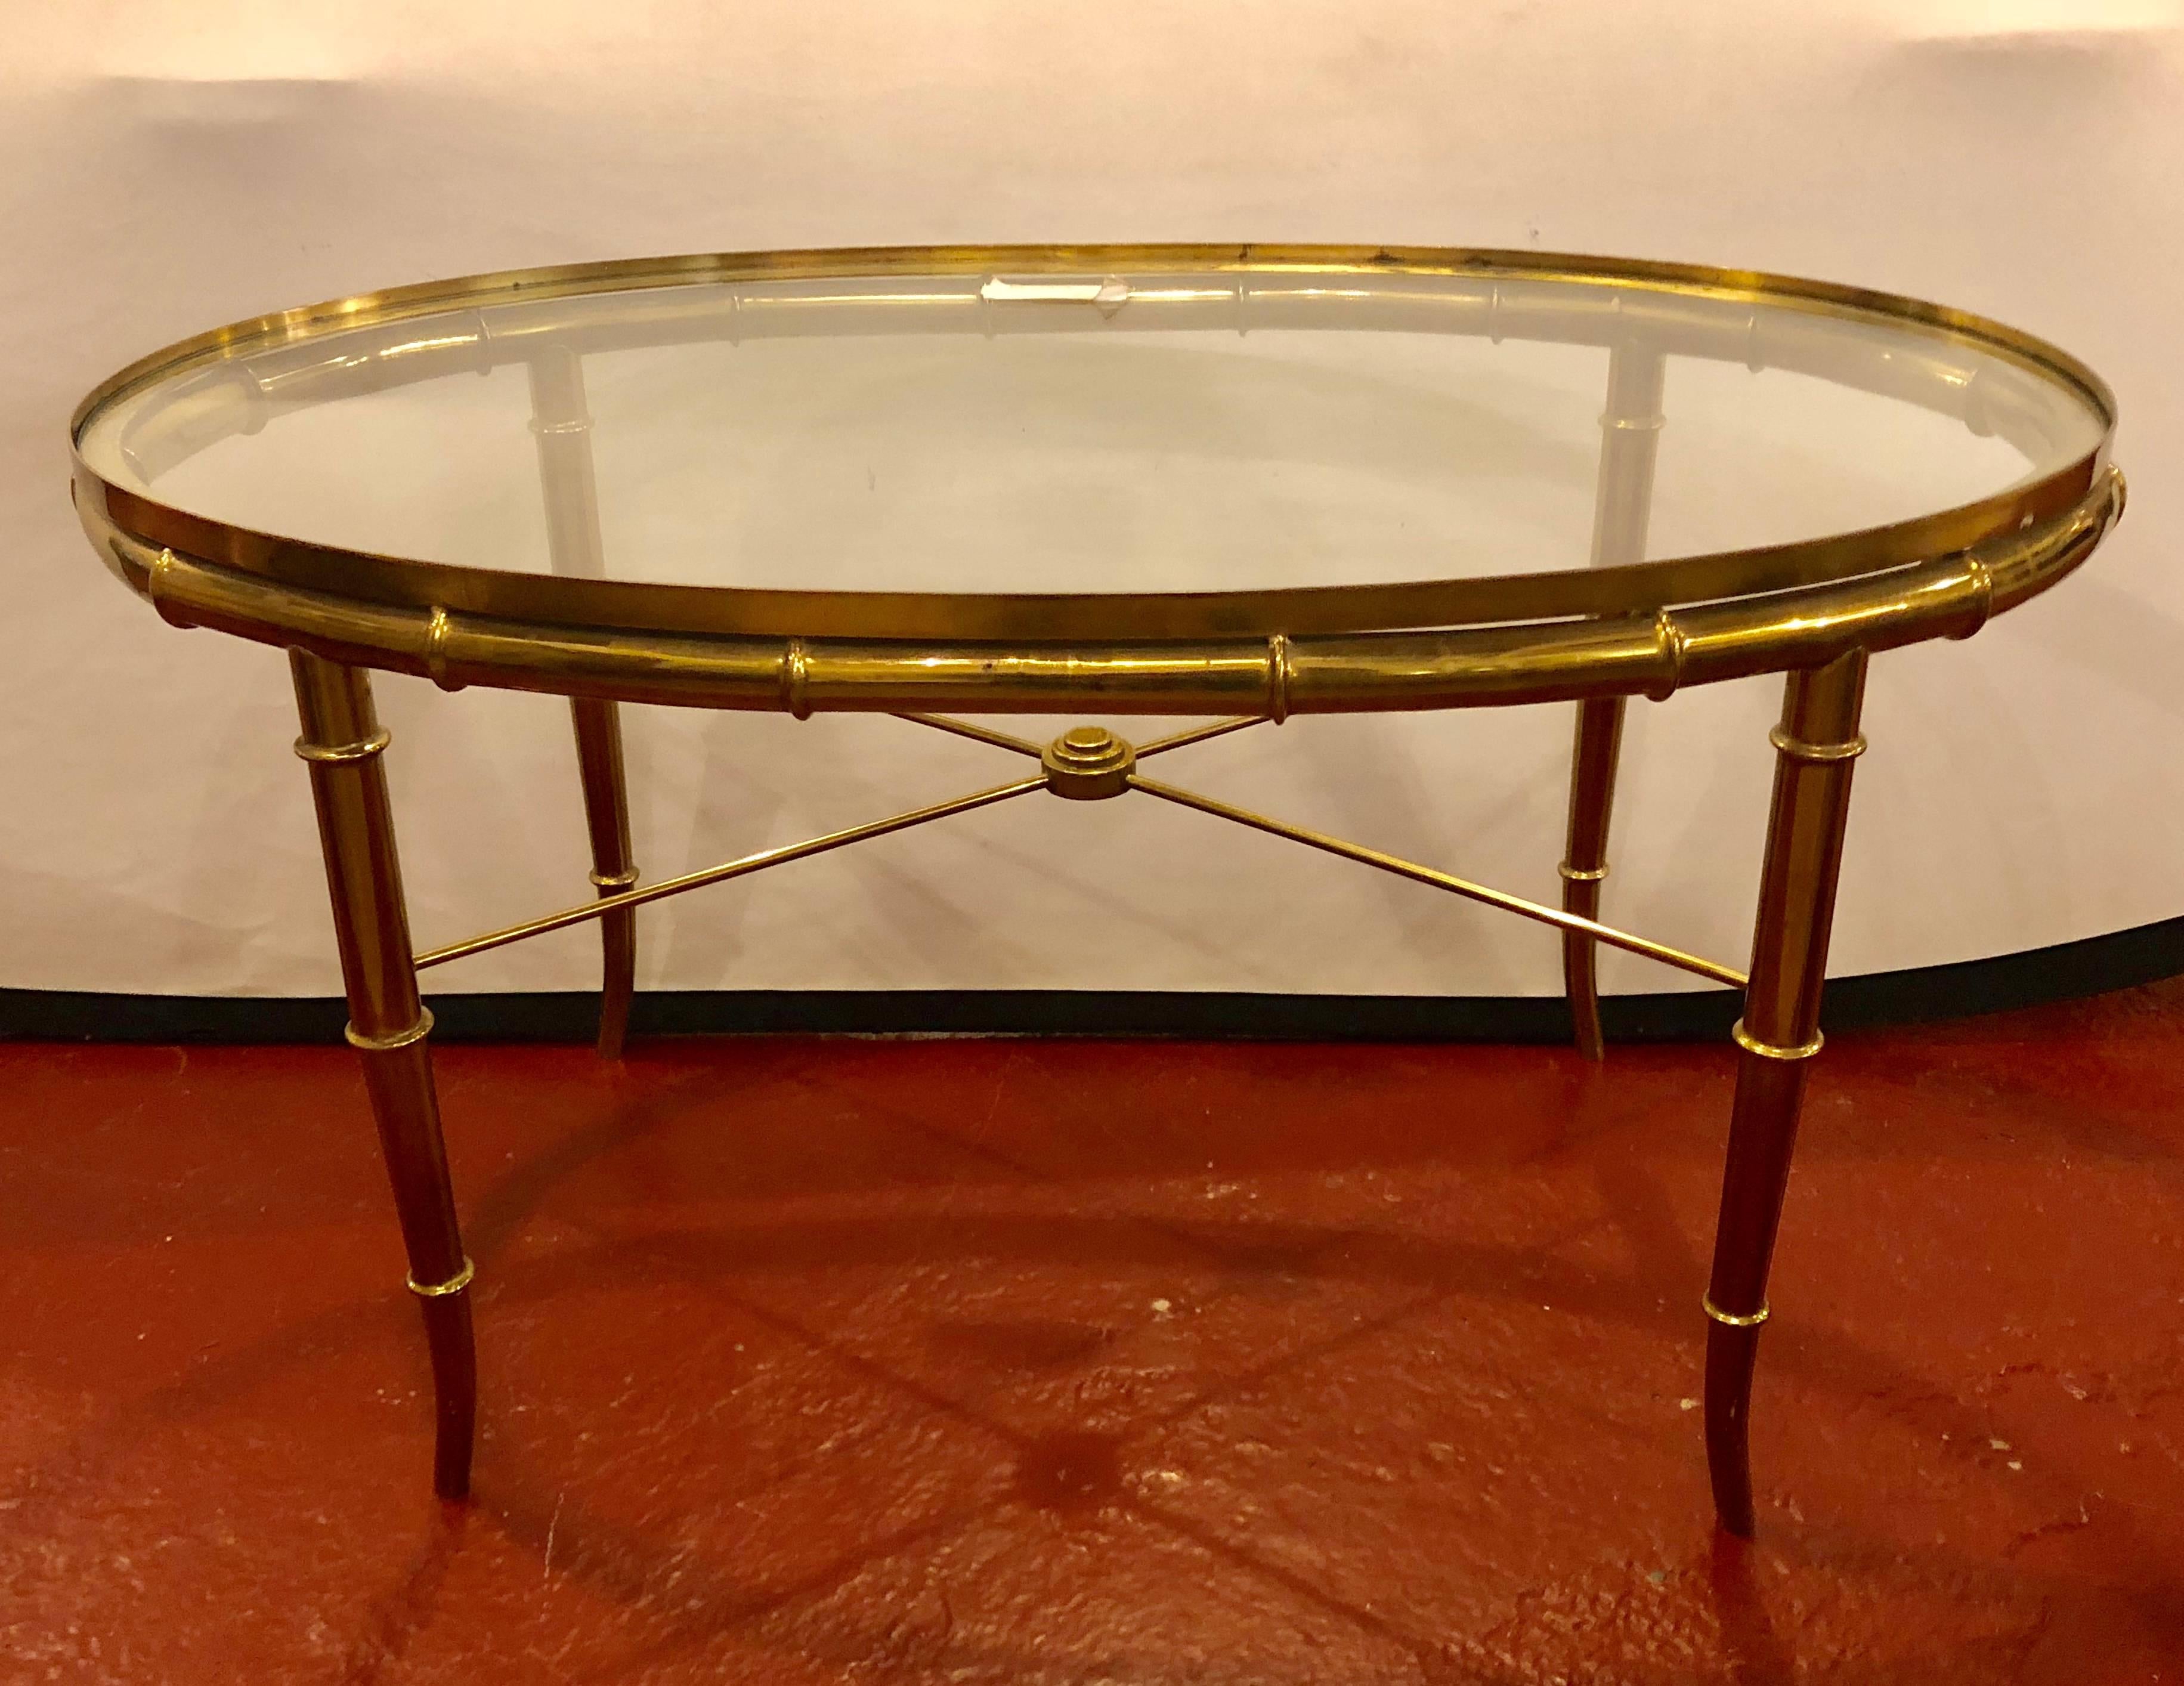 A Hollywood Regency style gilt metal faux bamboo oval glass top coffee table.